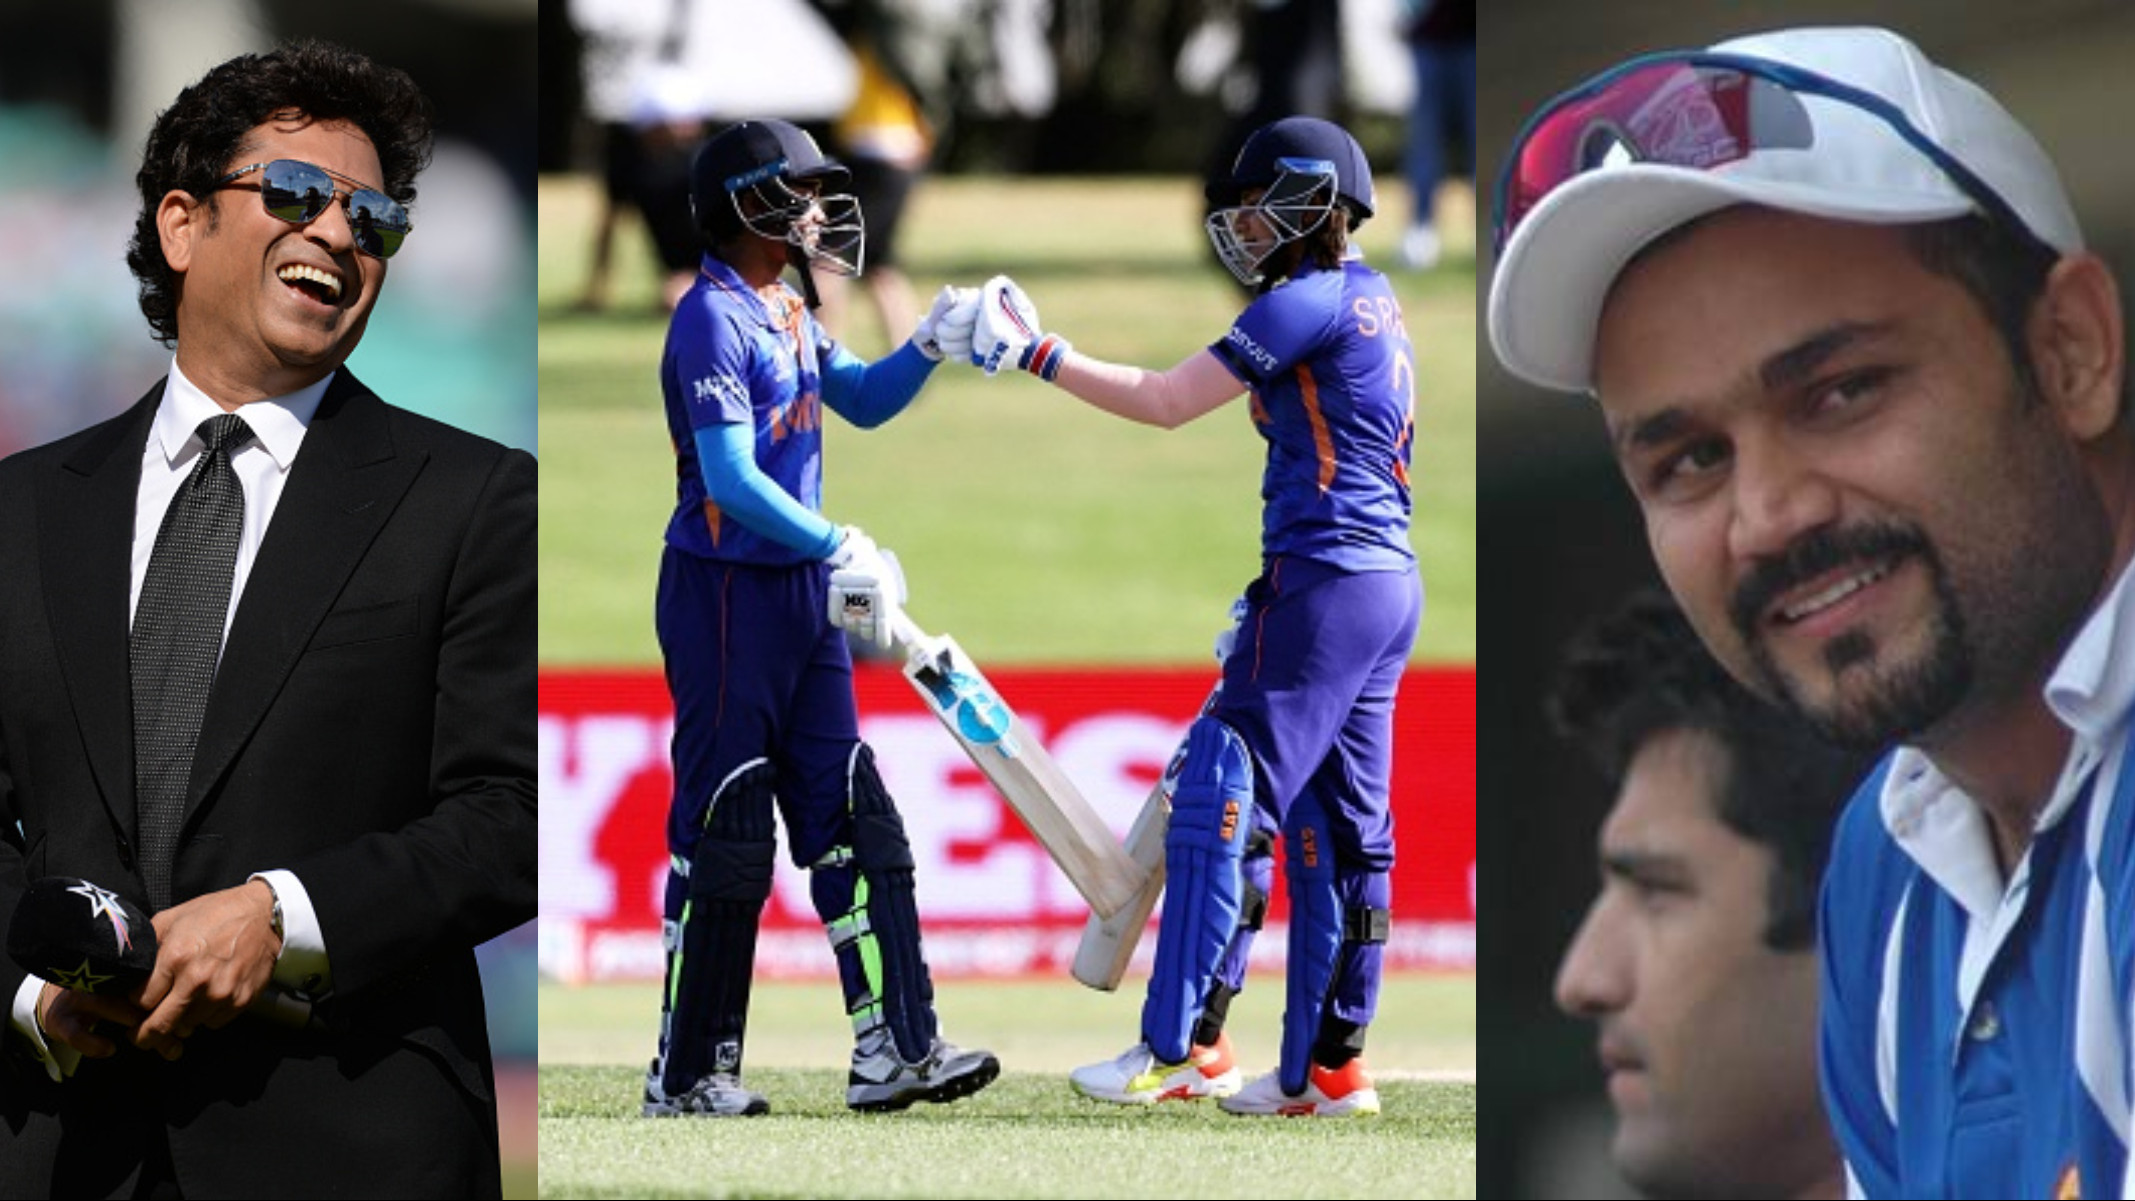 CWC 2022: Cricket fraternity reacts as India beat Pakistan by 107 runs in their Women's World Cup opener